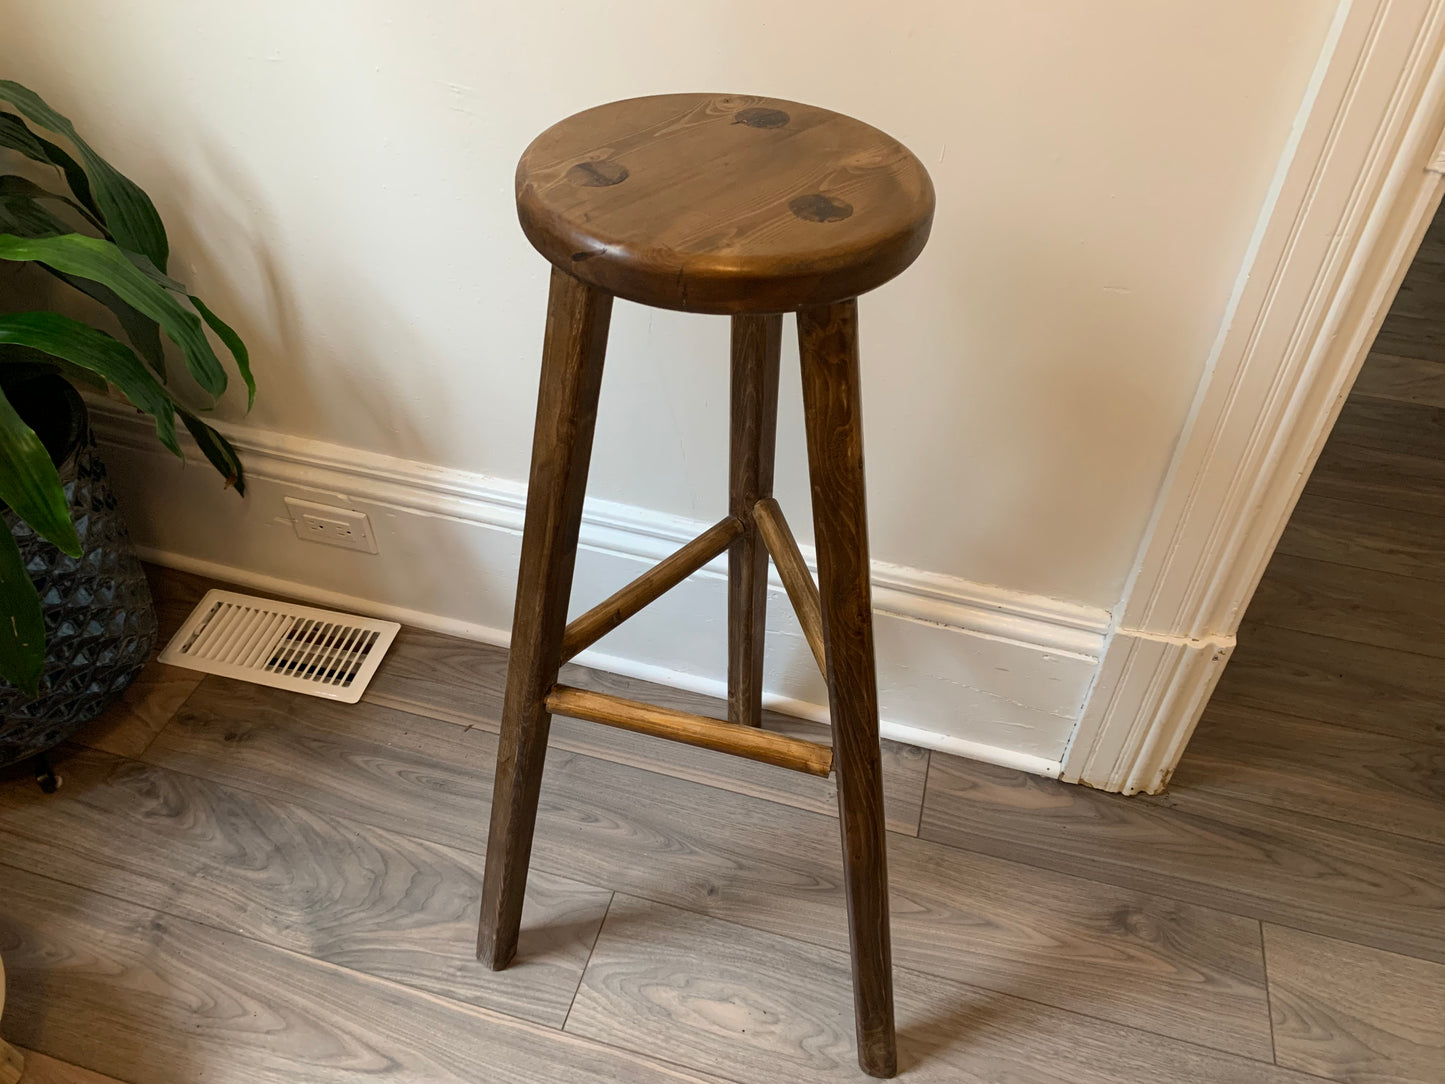 Build Your Own Barstool, Three or Four Legged Barstools. Custom Order, Canadian Made.